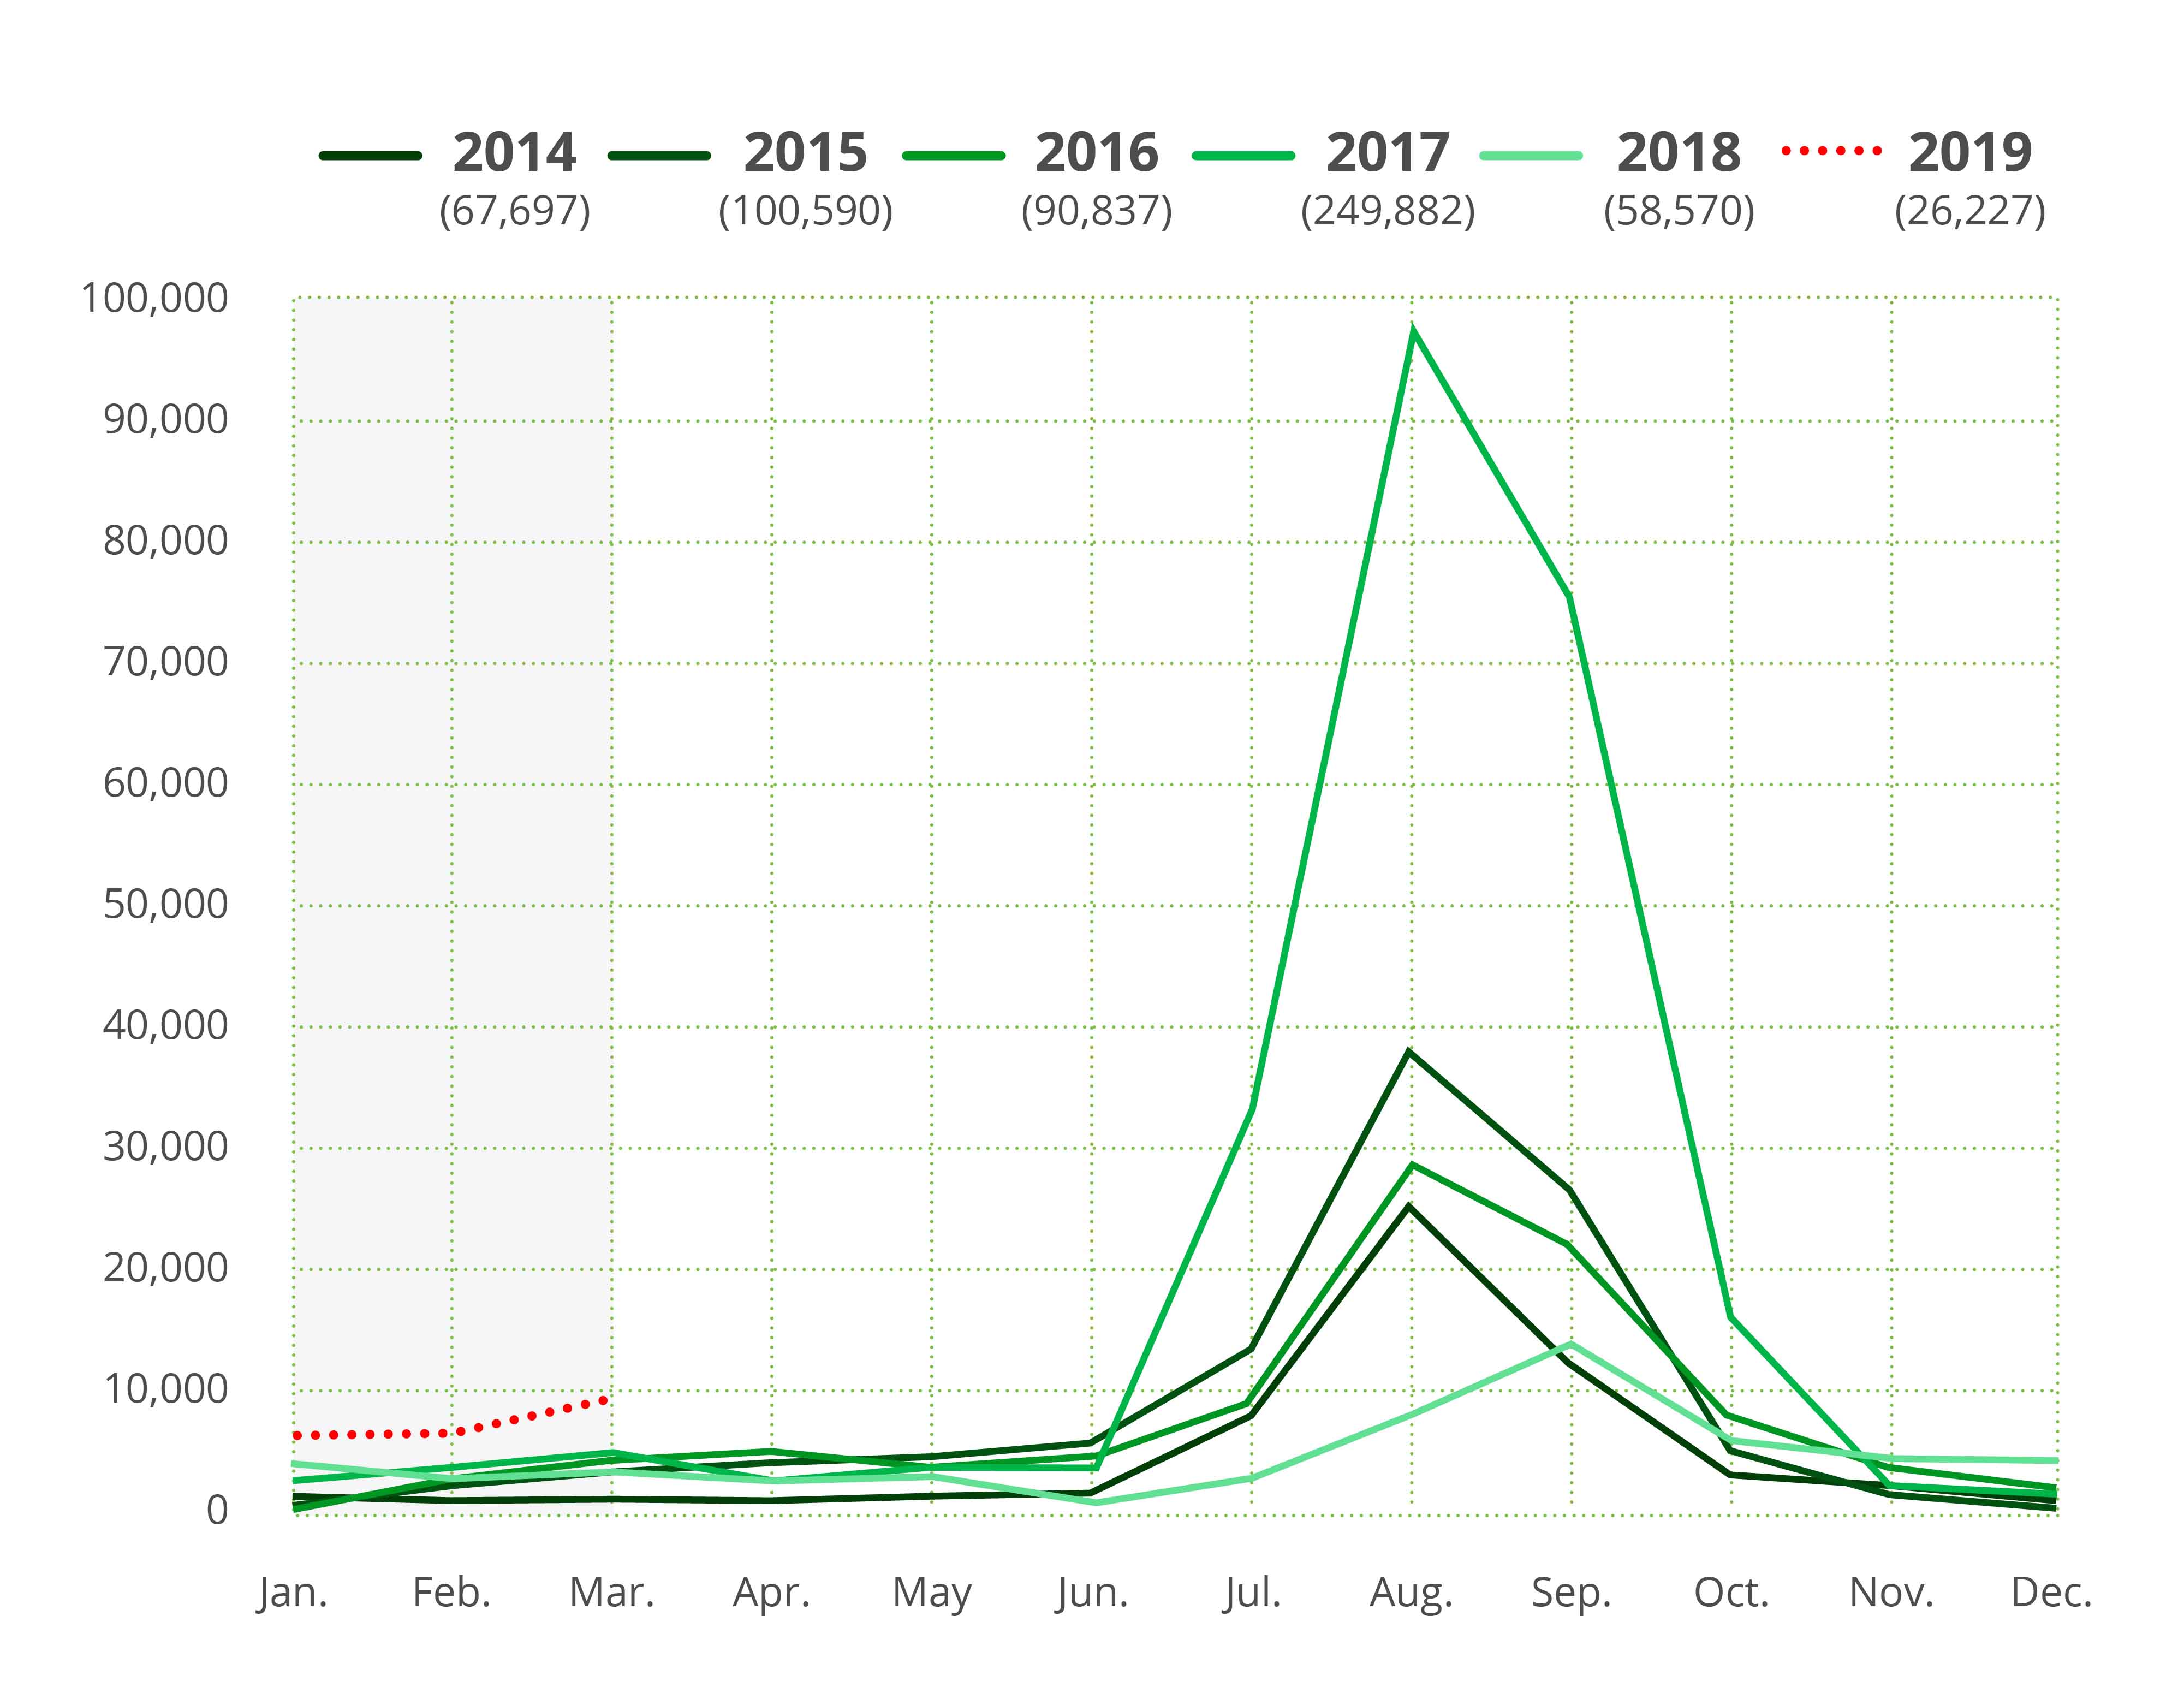 An infographic depicting flu season data from 2014 to 2019, with 2017 seeing the highest peak